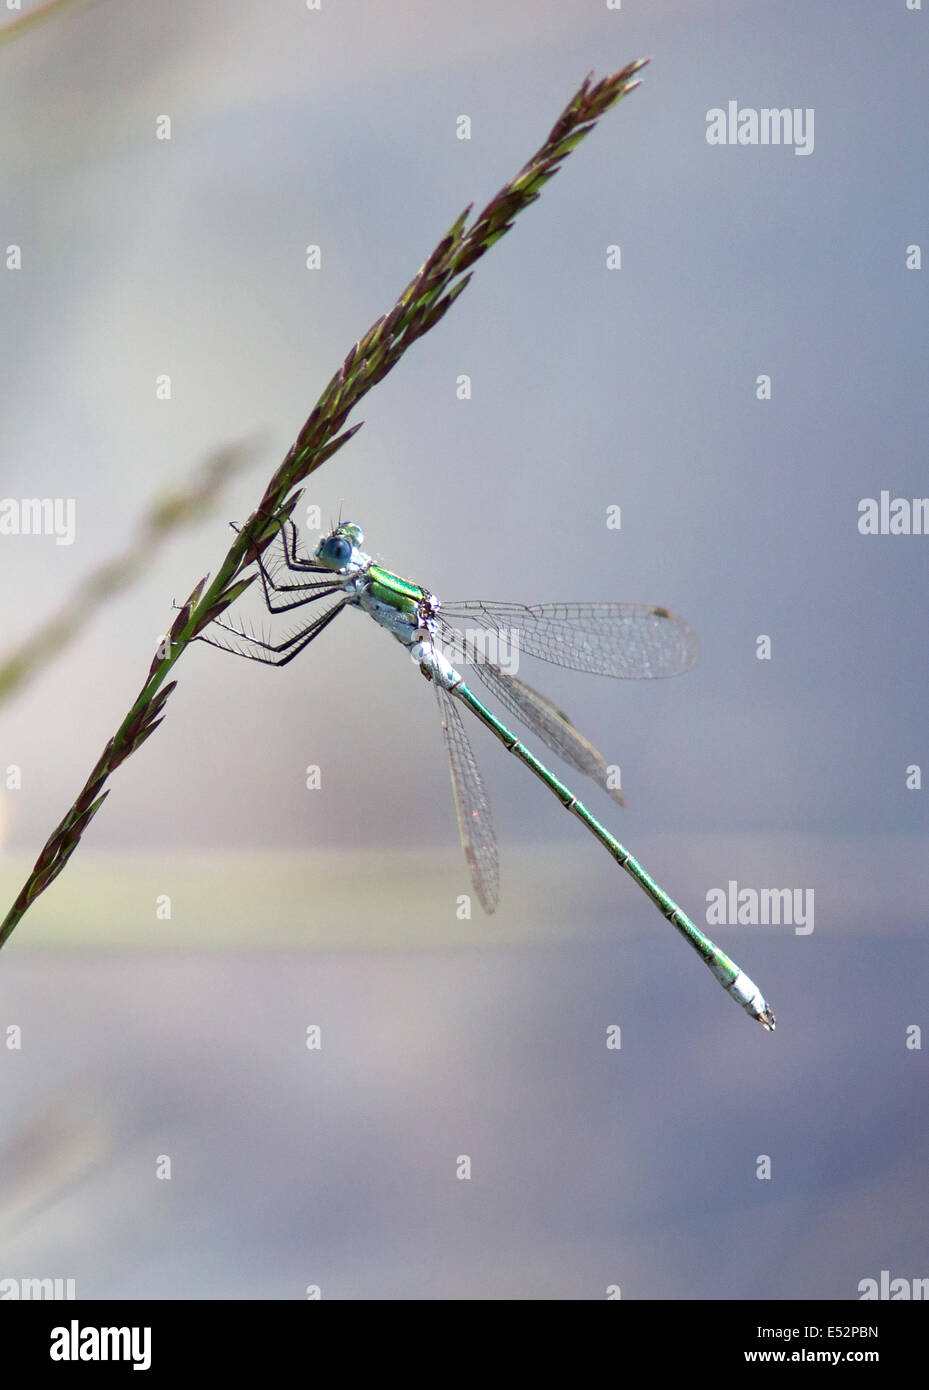 Male Emerald Damselfly Lestes sponsa perched above an acidic bog pool at Thursley Common in Surrey UK Stock Photo